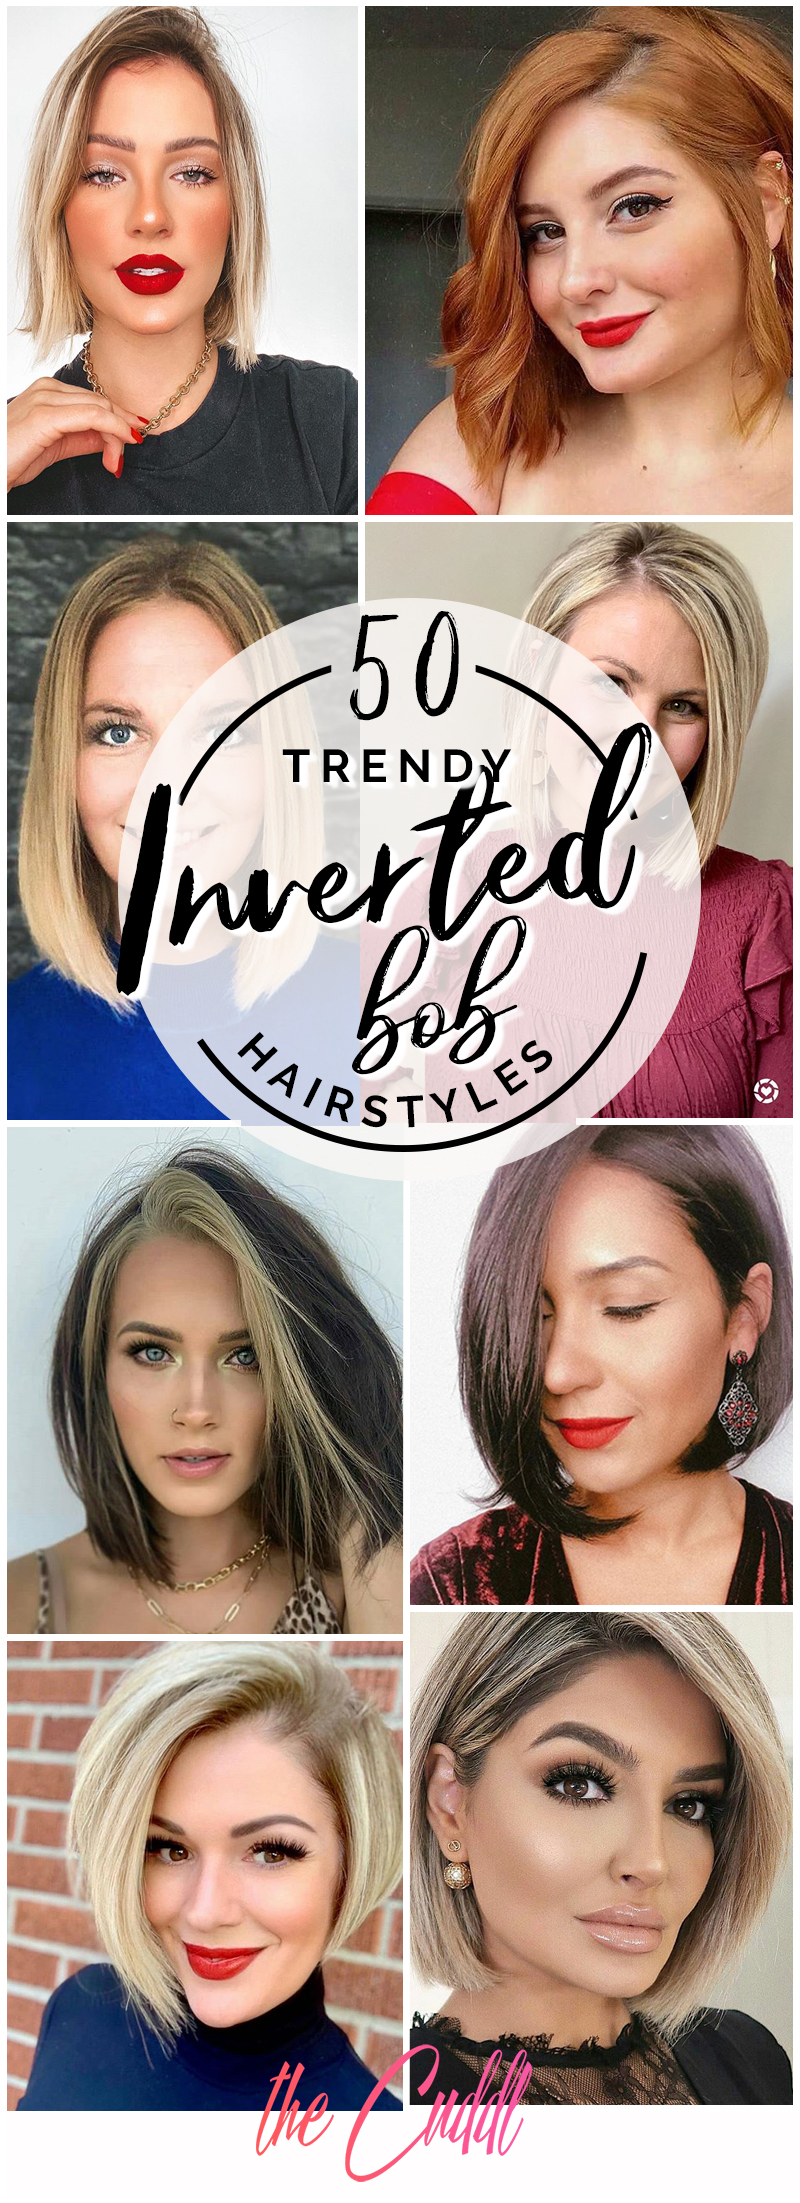 From chic to classy: The best-inverted bob hairstyle ideas for every occasion